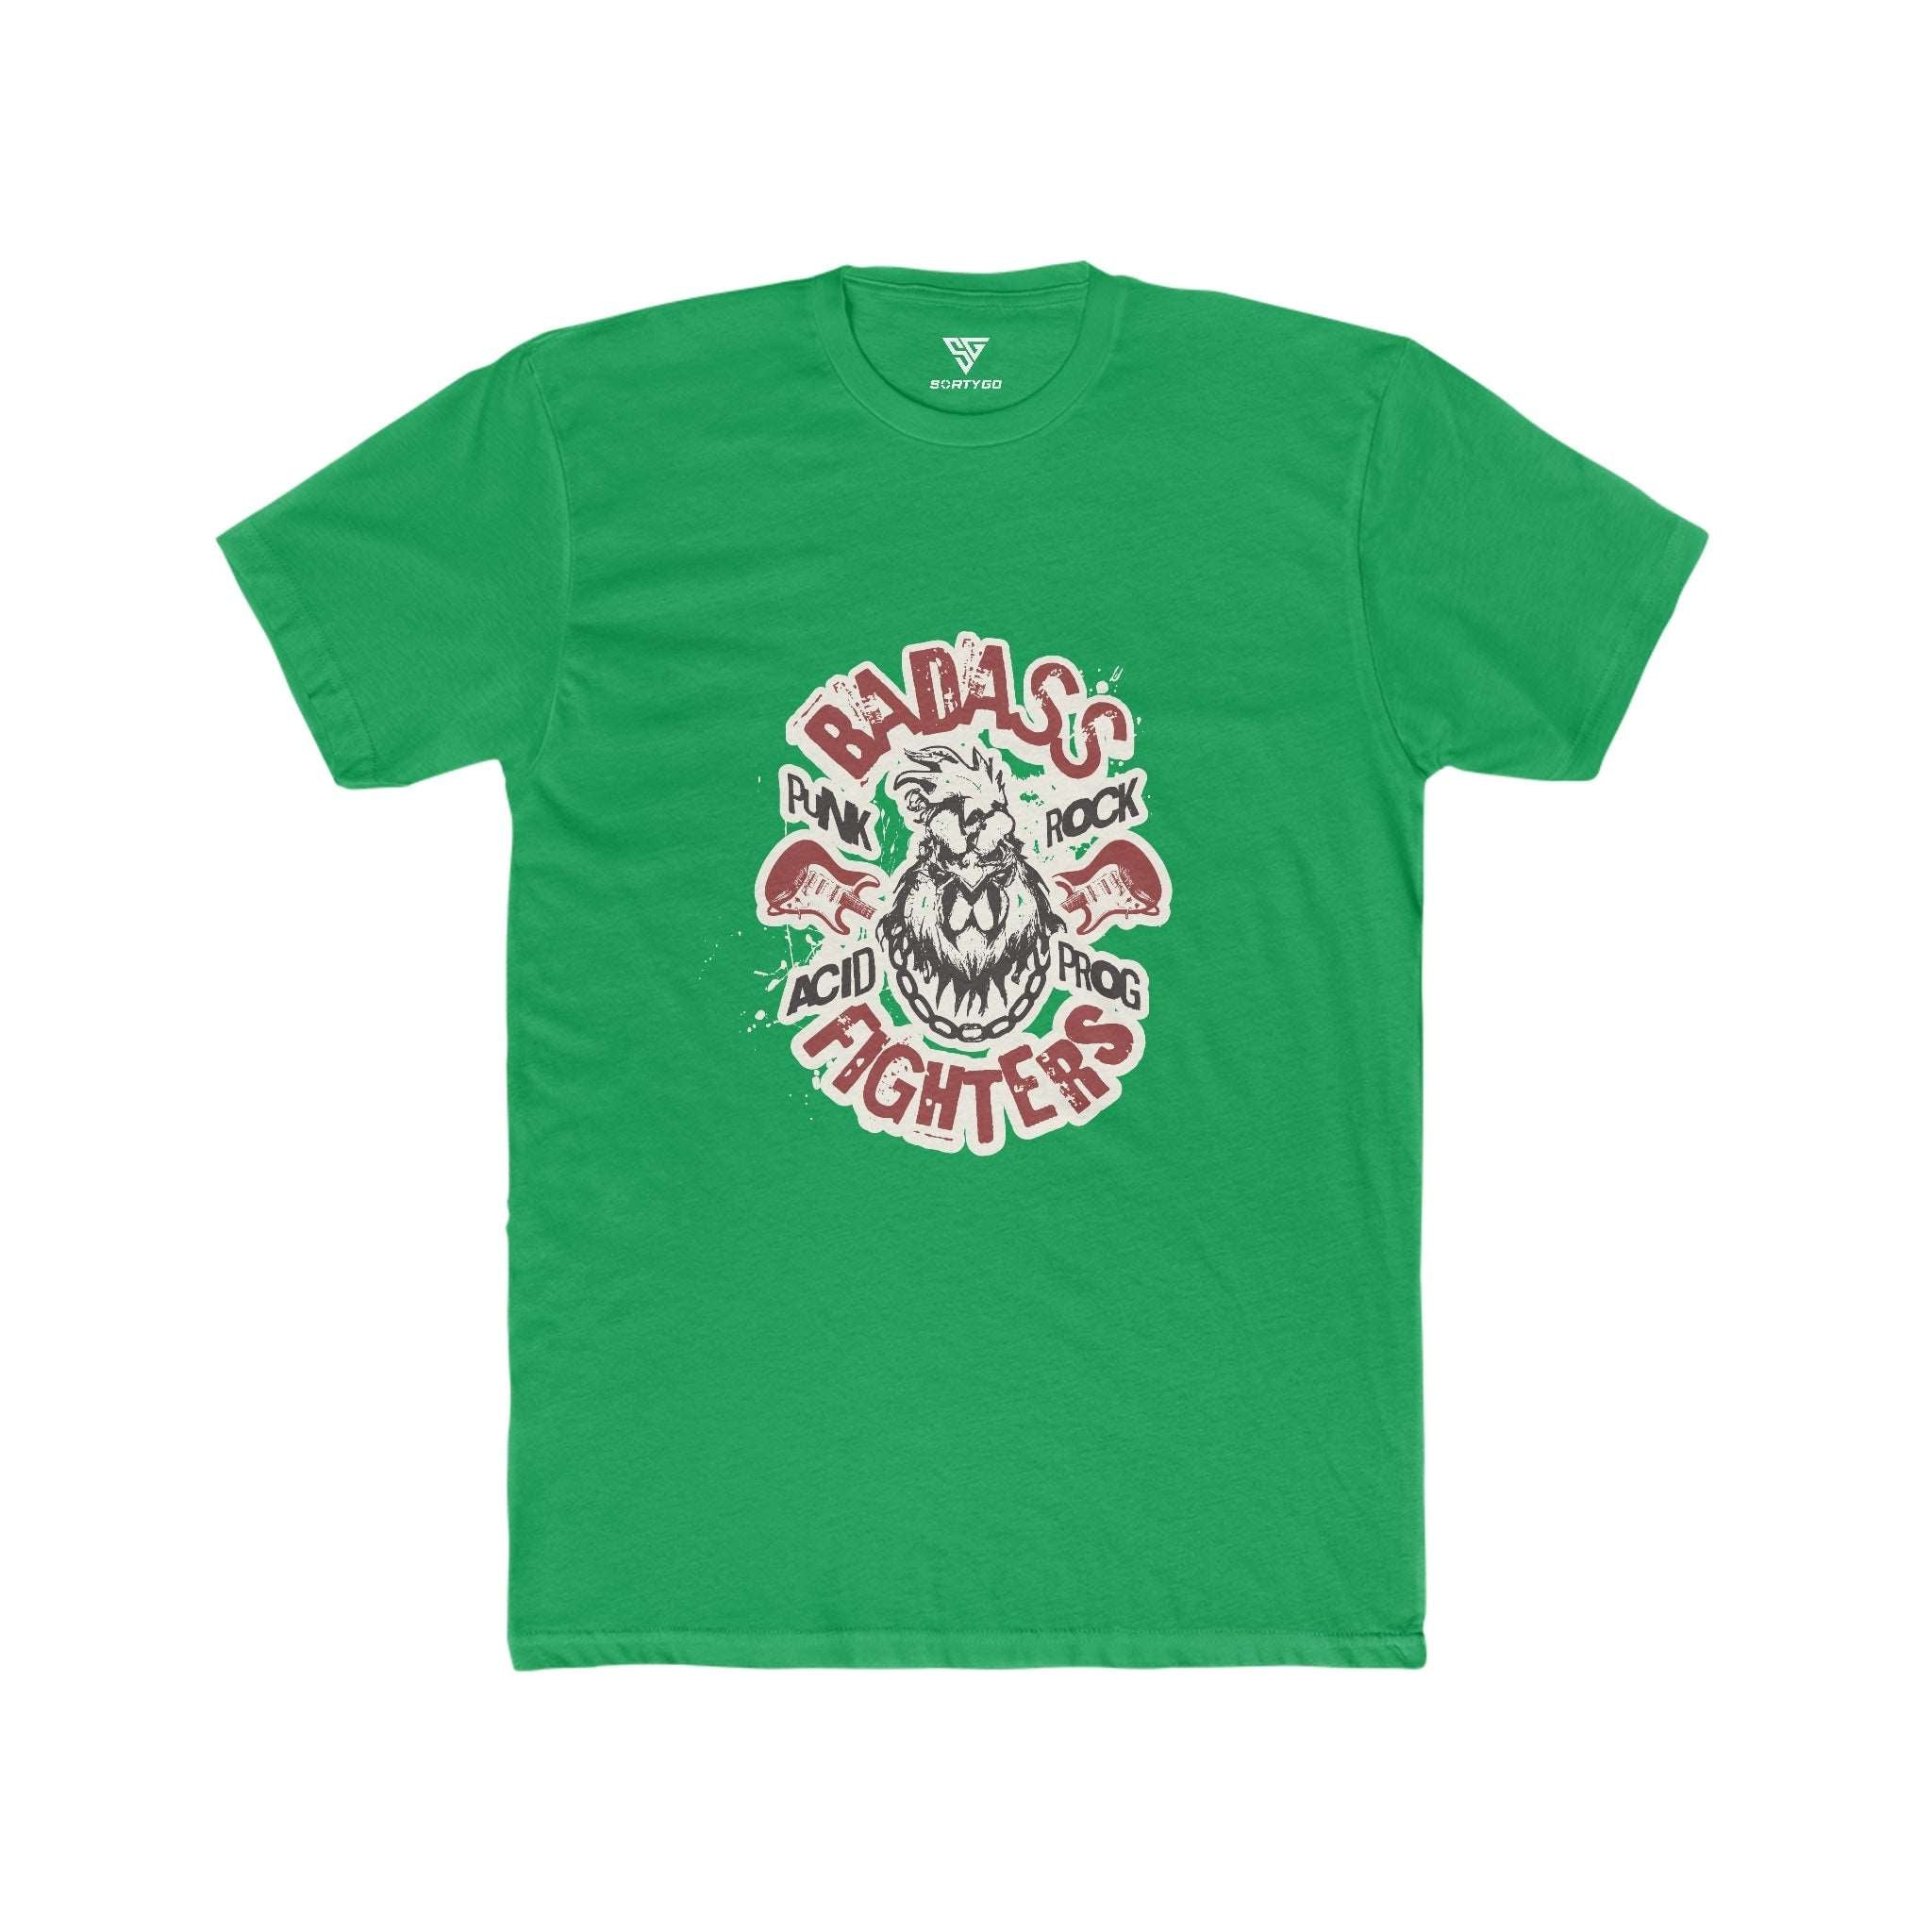 SORTYGO - Badass Fighters Men Fitted T-Shirt in Solid Kelly Green